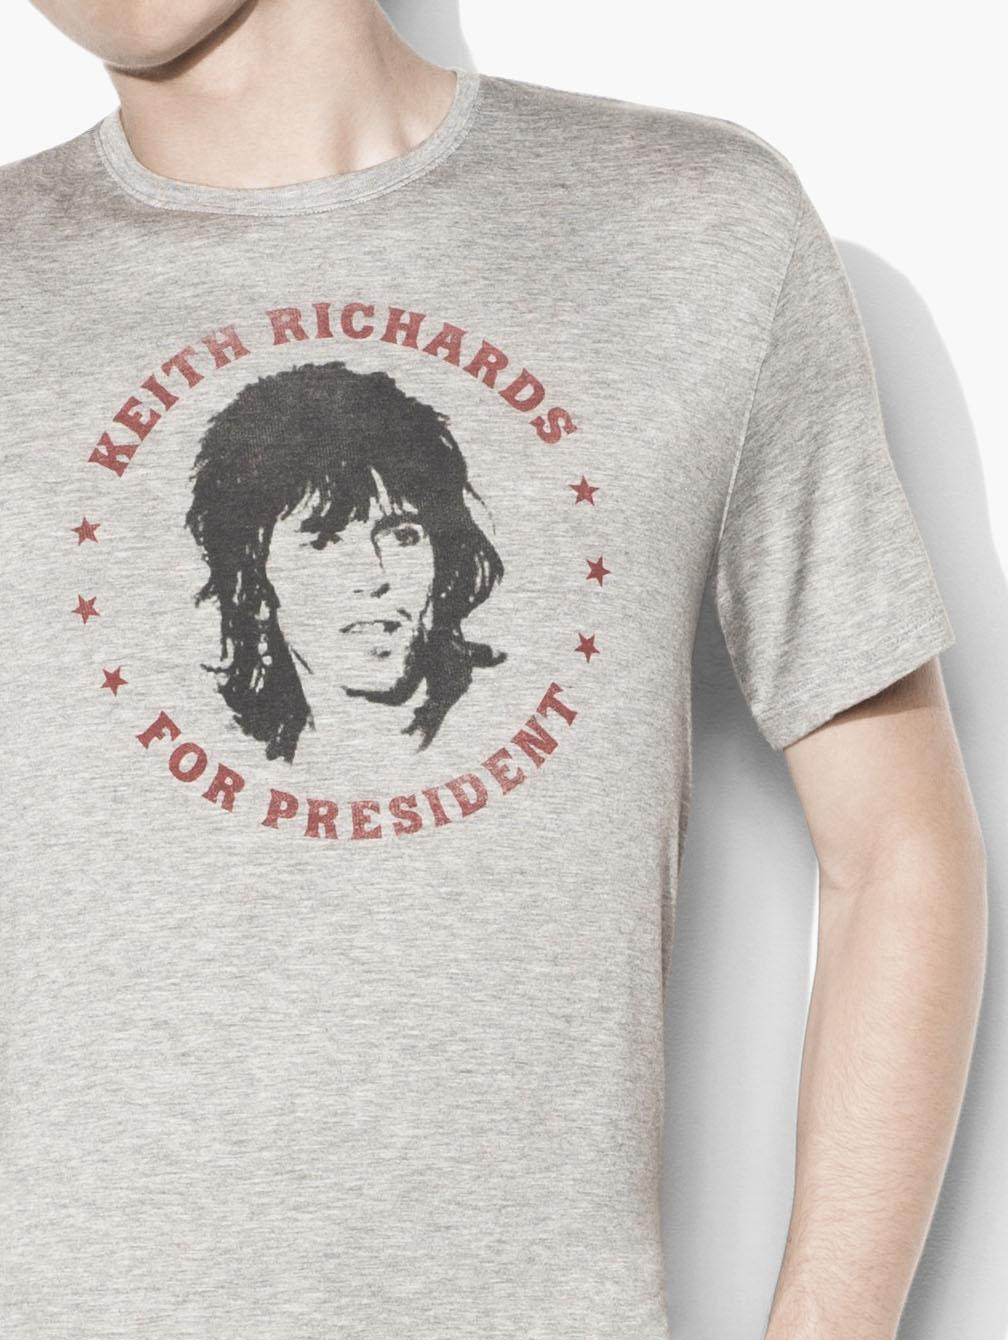 Keith Richards for President Graphic Tee image number 3